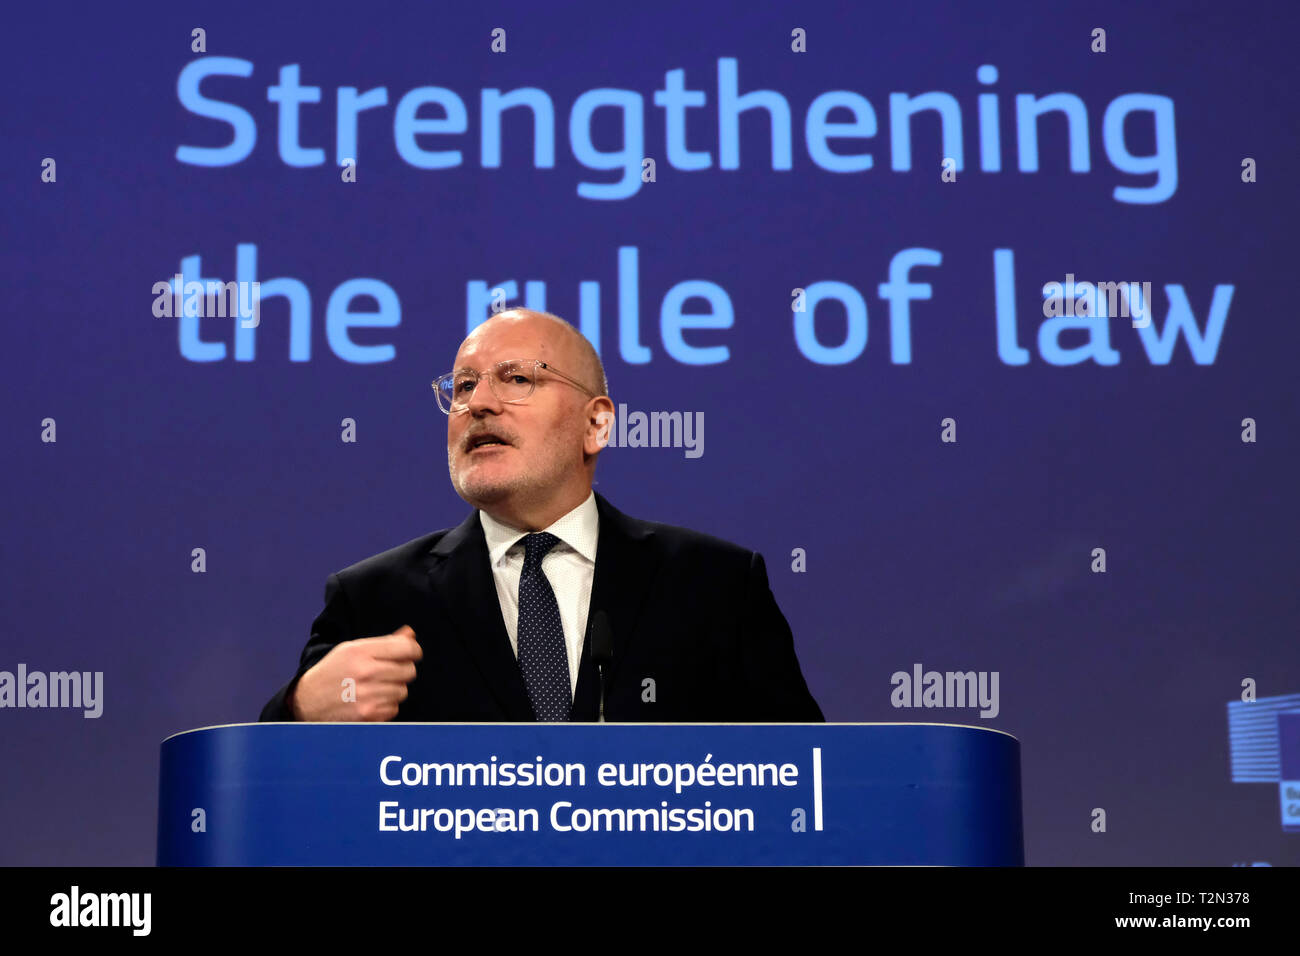 Brussels, Belgium. 3rd April 2019.European Commission Vice-President Frans Timmermans speaks during a media conference on strengthening the rule of law. Alexandros Michailidis/Alamy Live News Stock Photo